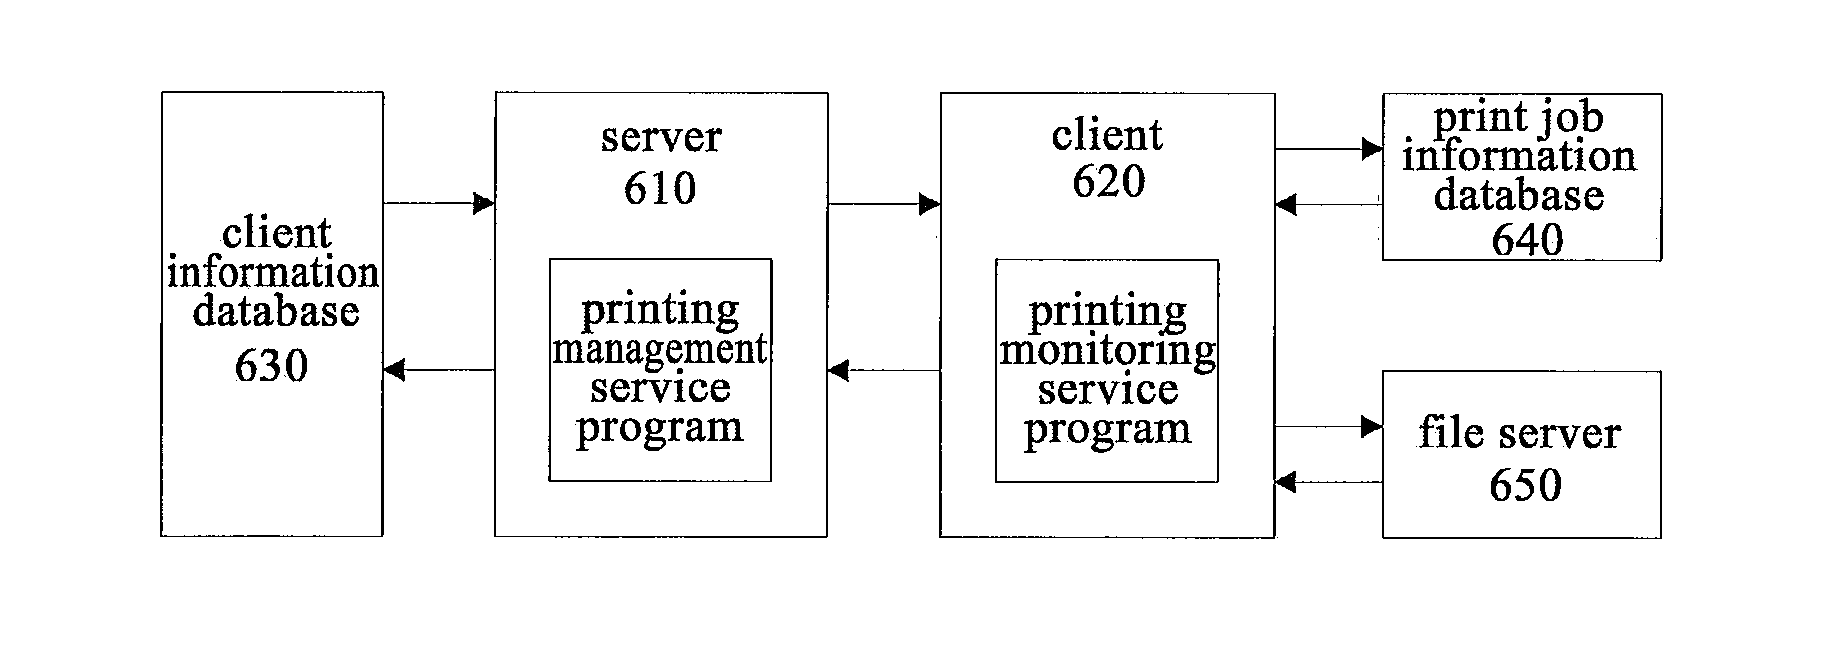 Method and system for document printing management and control, and document source tracking